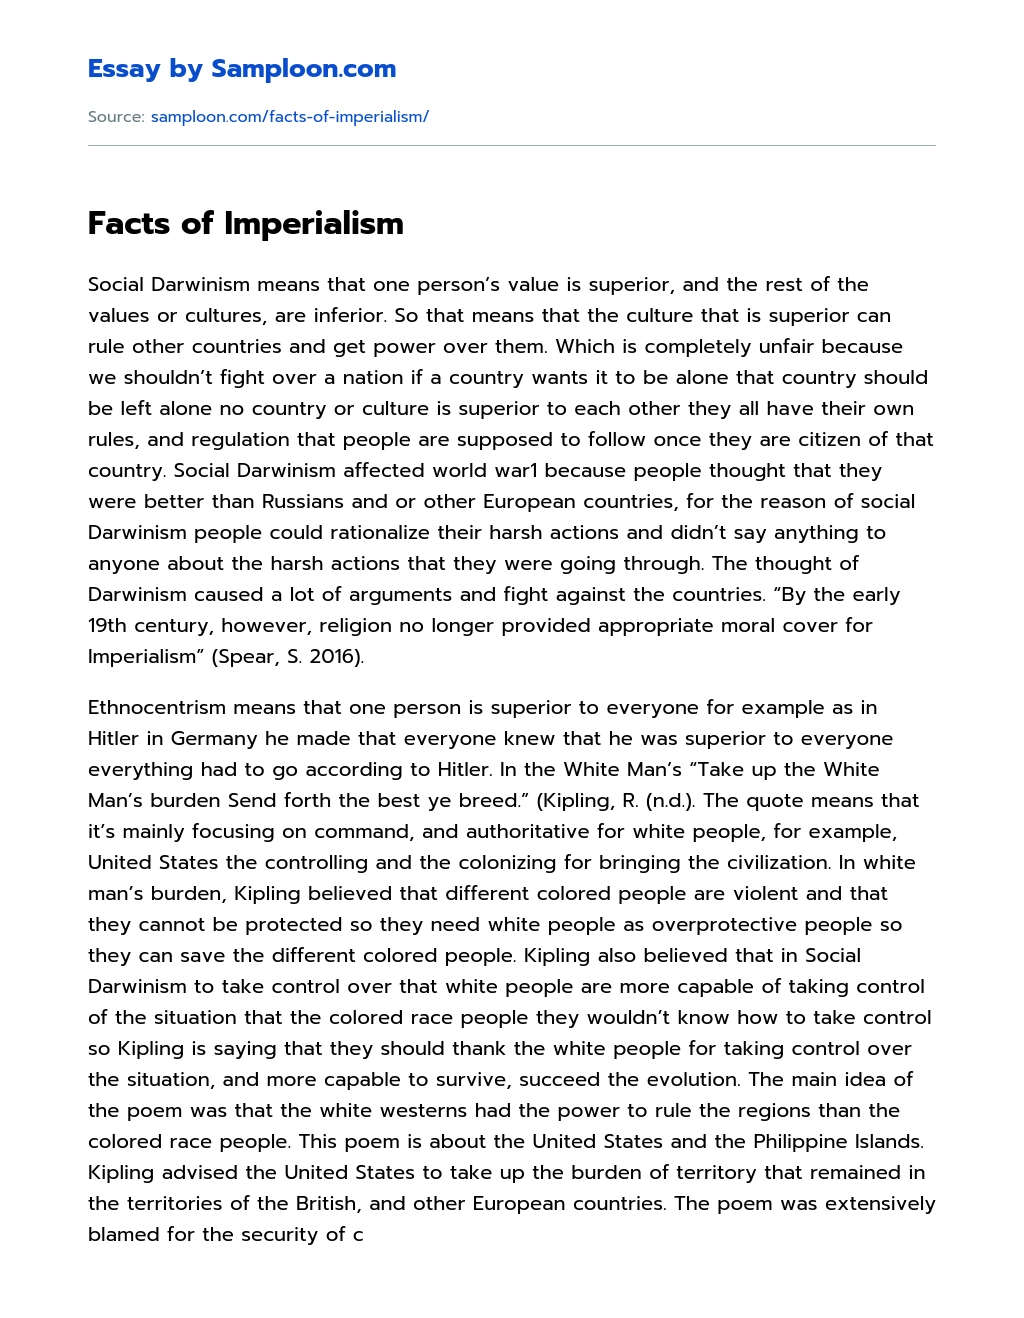 Facts of Imperialism essay